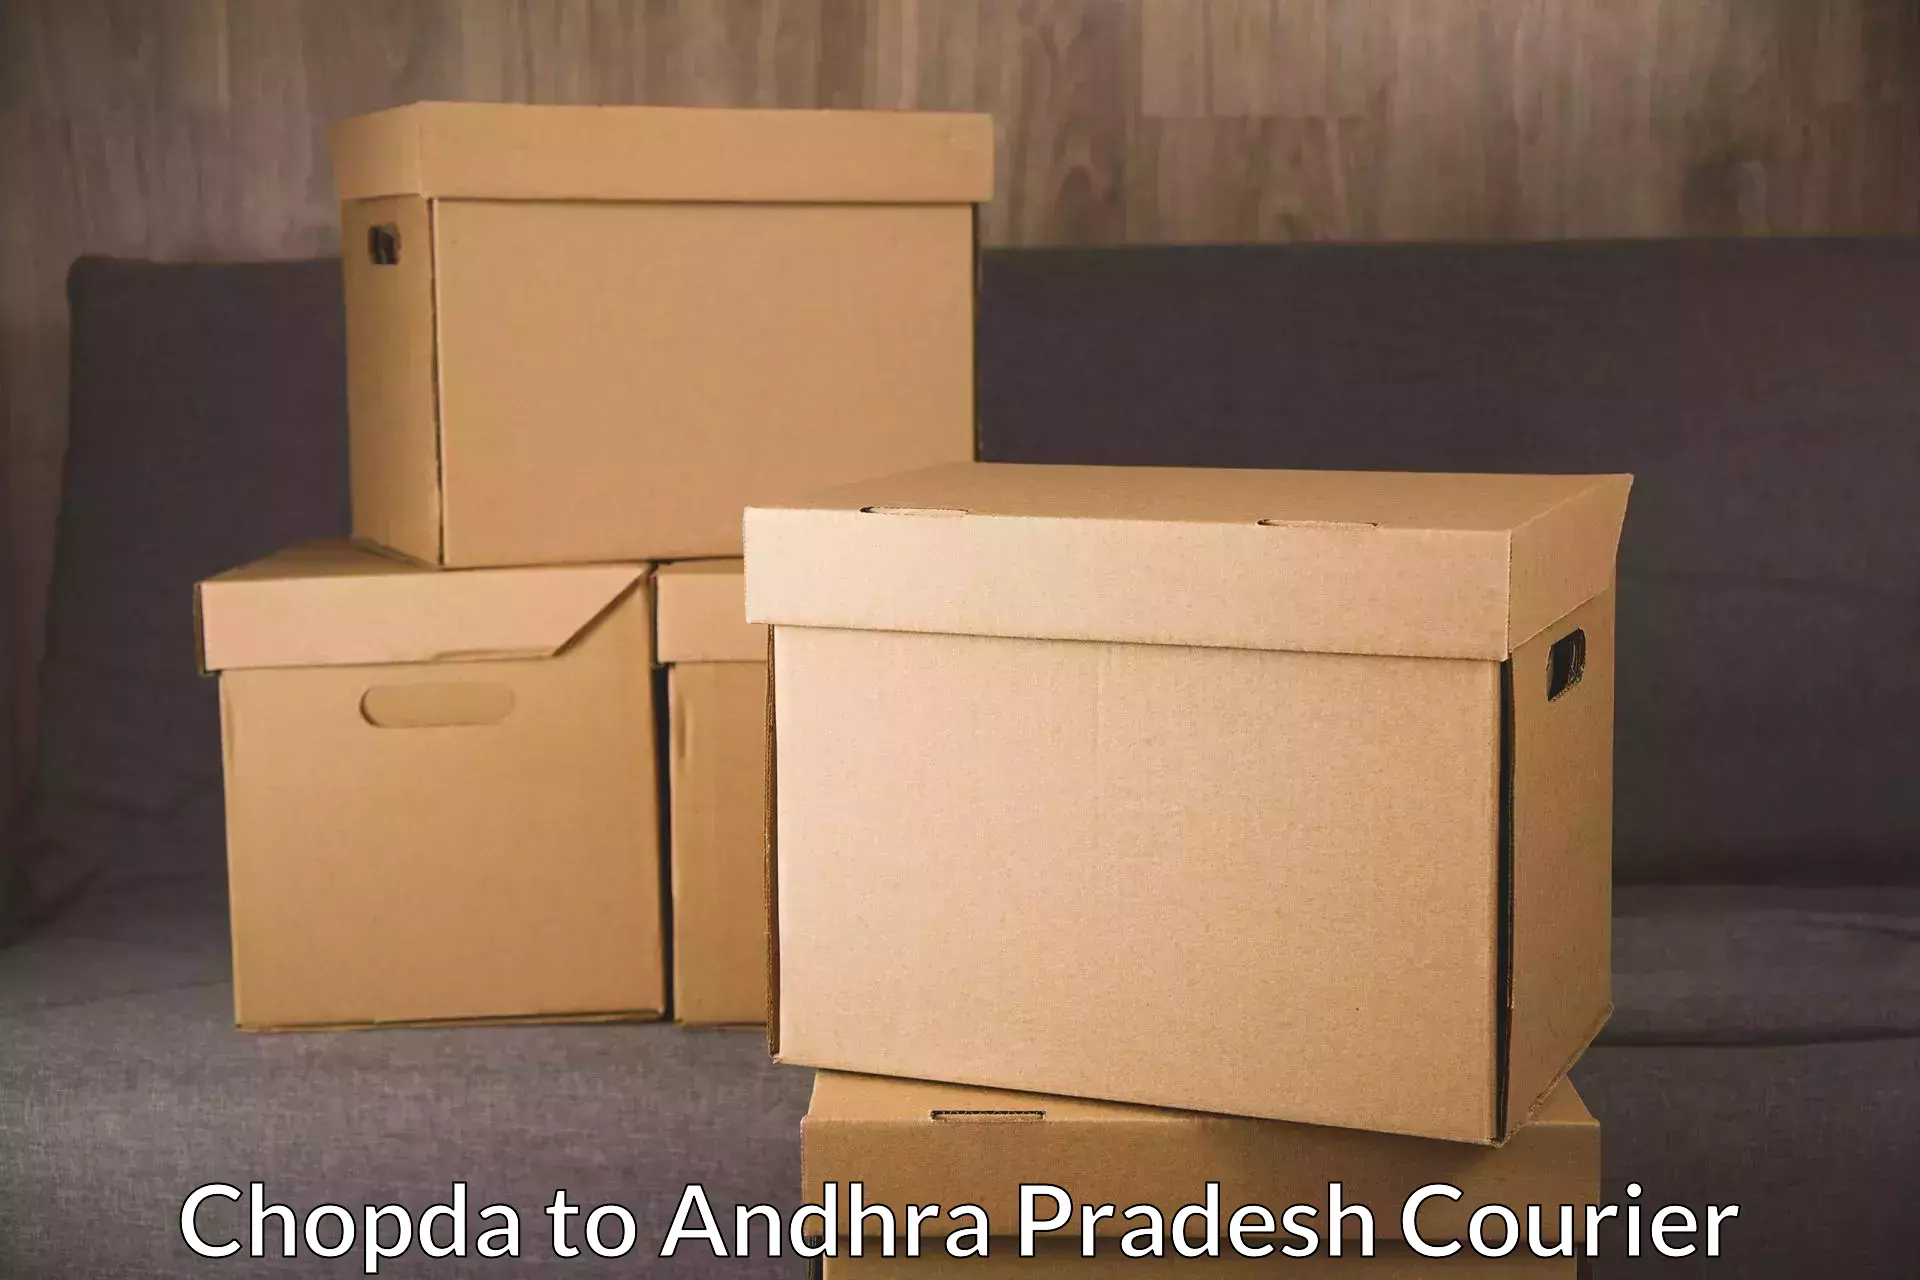 Reliable parcel services in Chopda to Andhra Pradesh